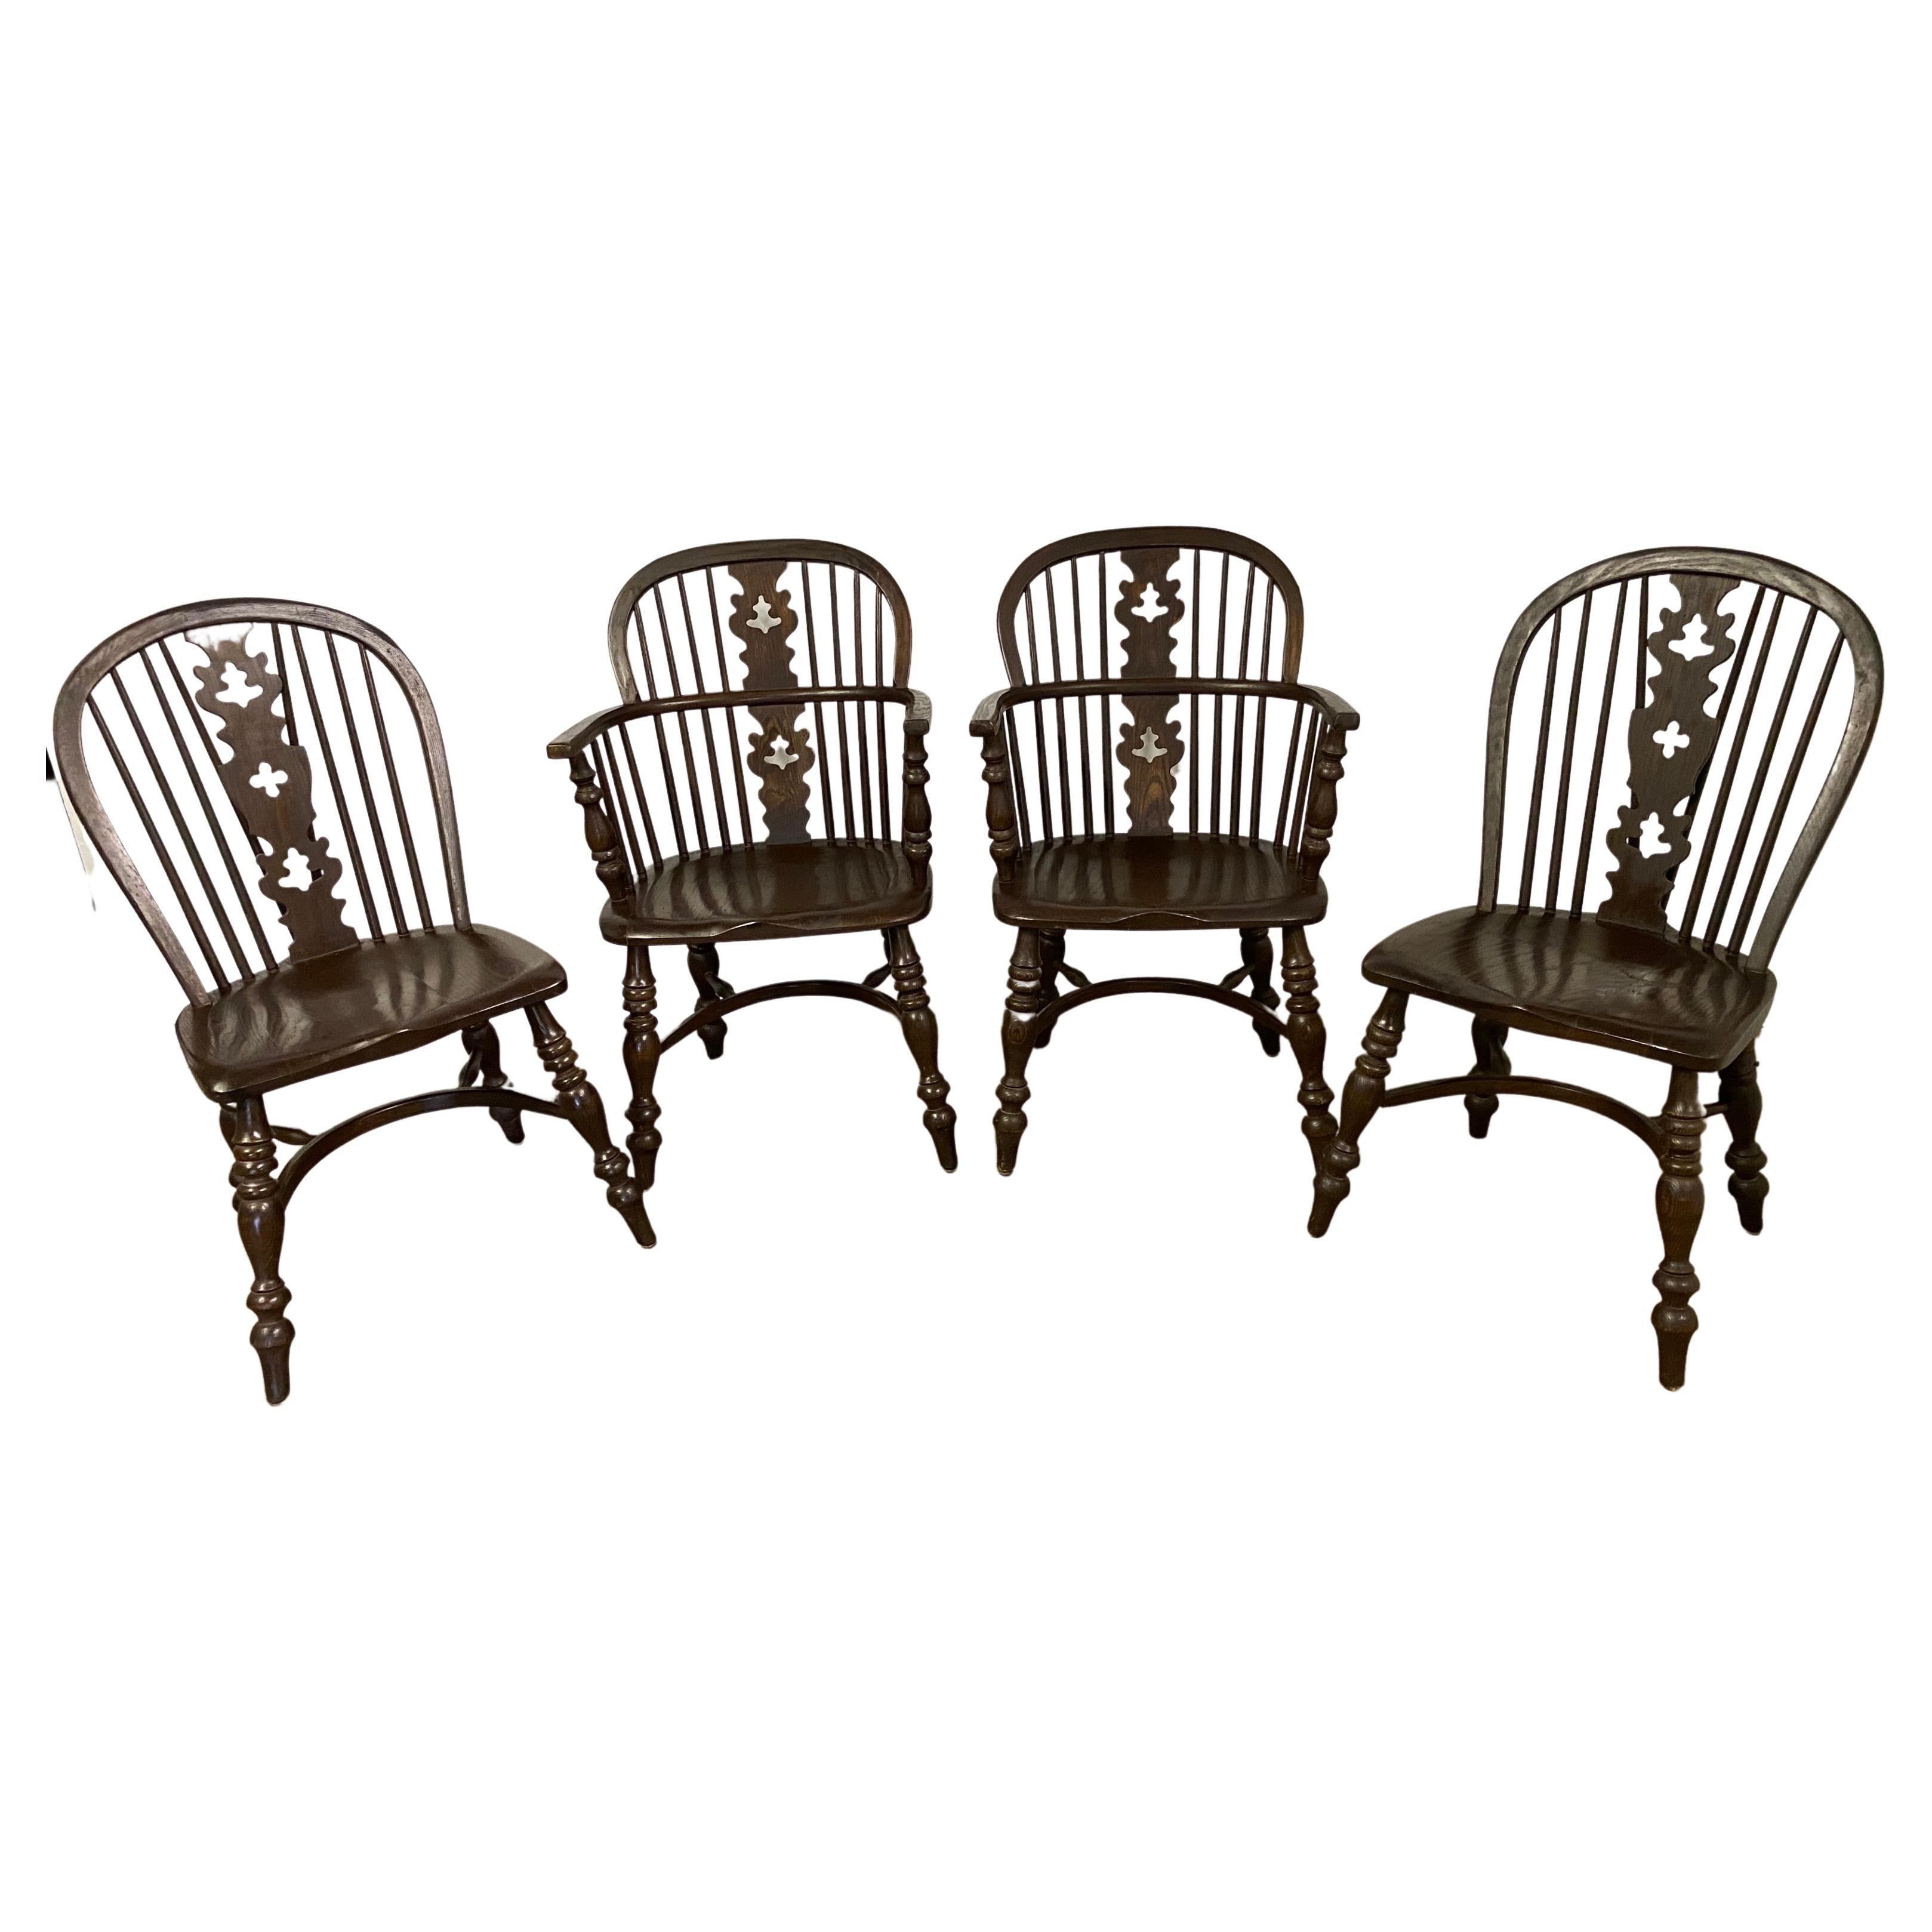 Set of Four (4) Antique English Brace Back Windsor Chairs For Sale